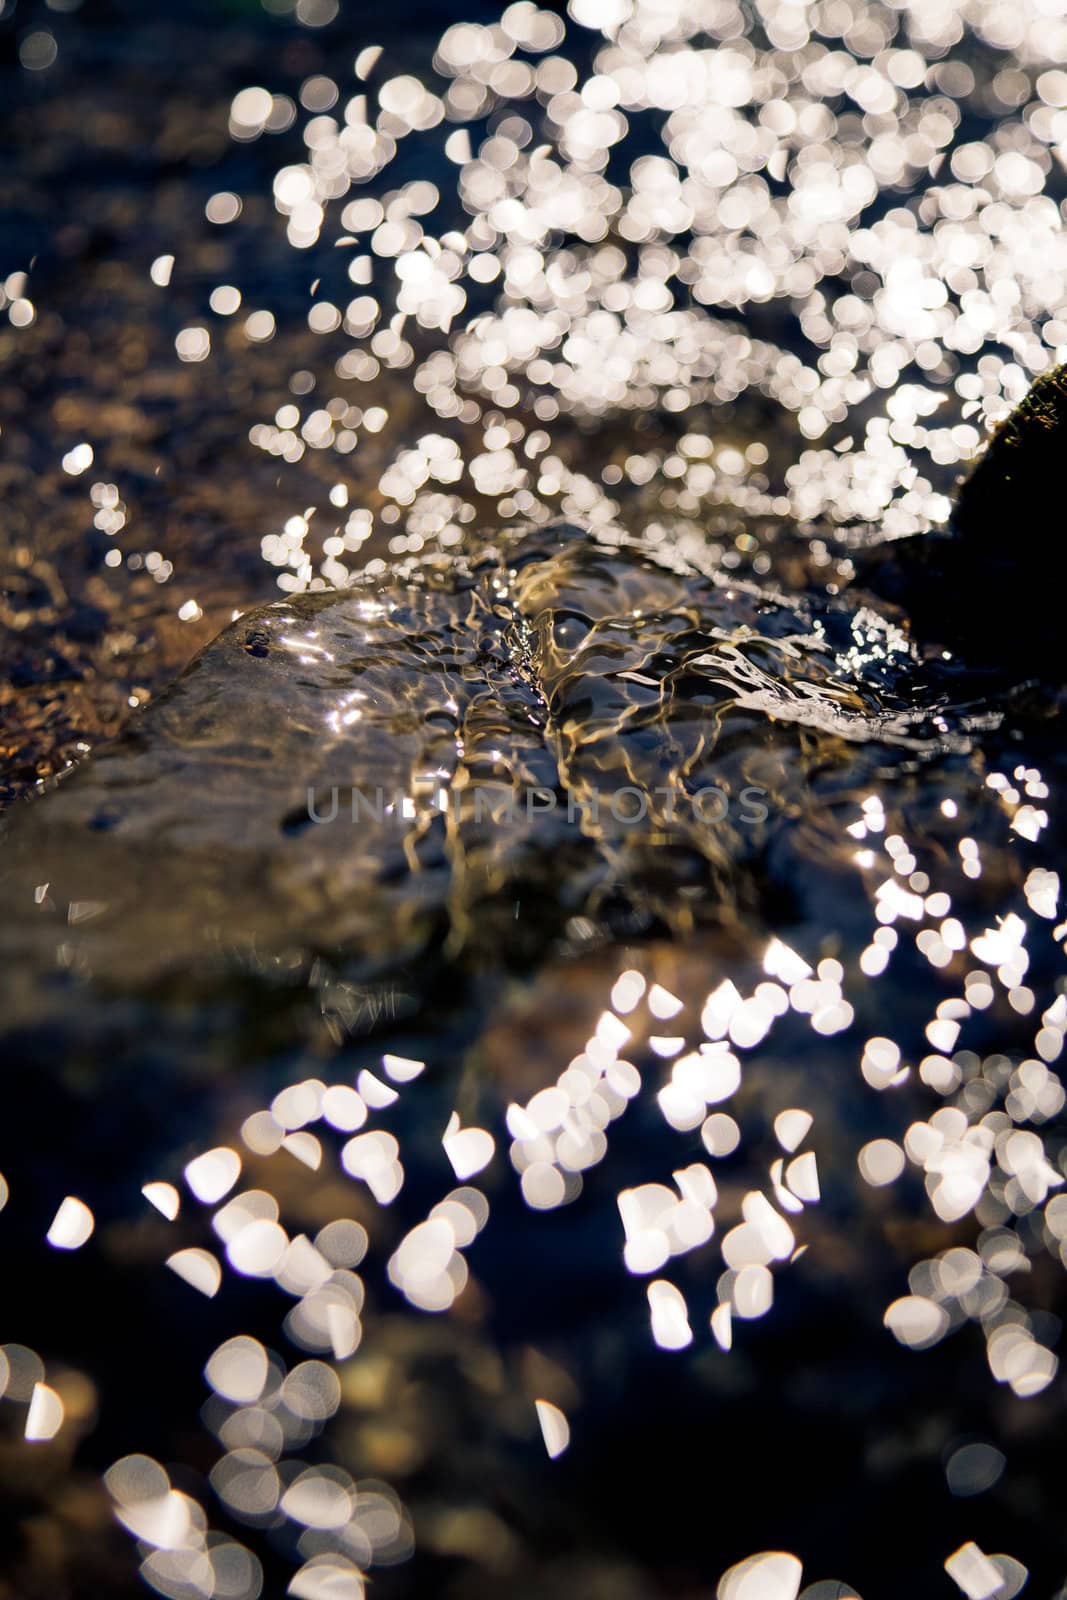 Abstract Water Flickers of a natural source